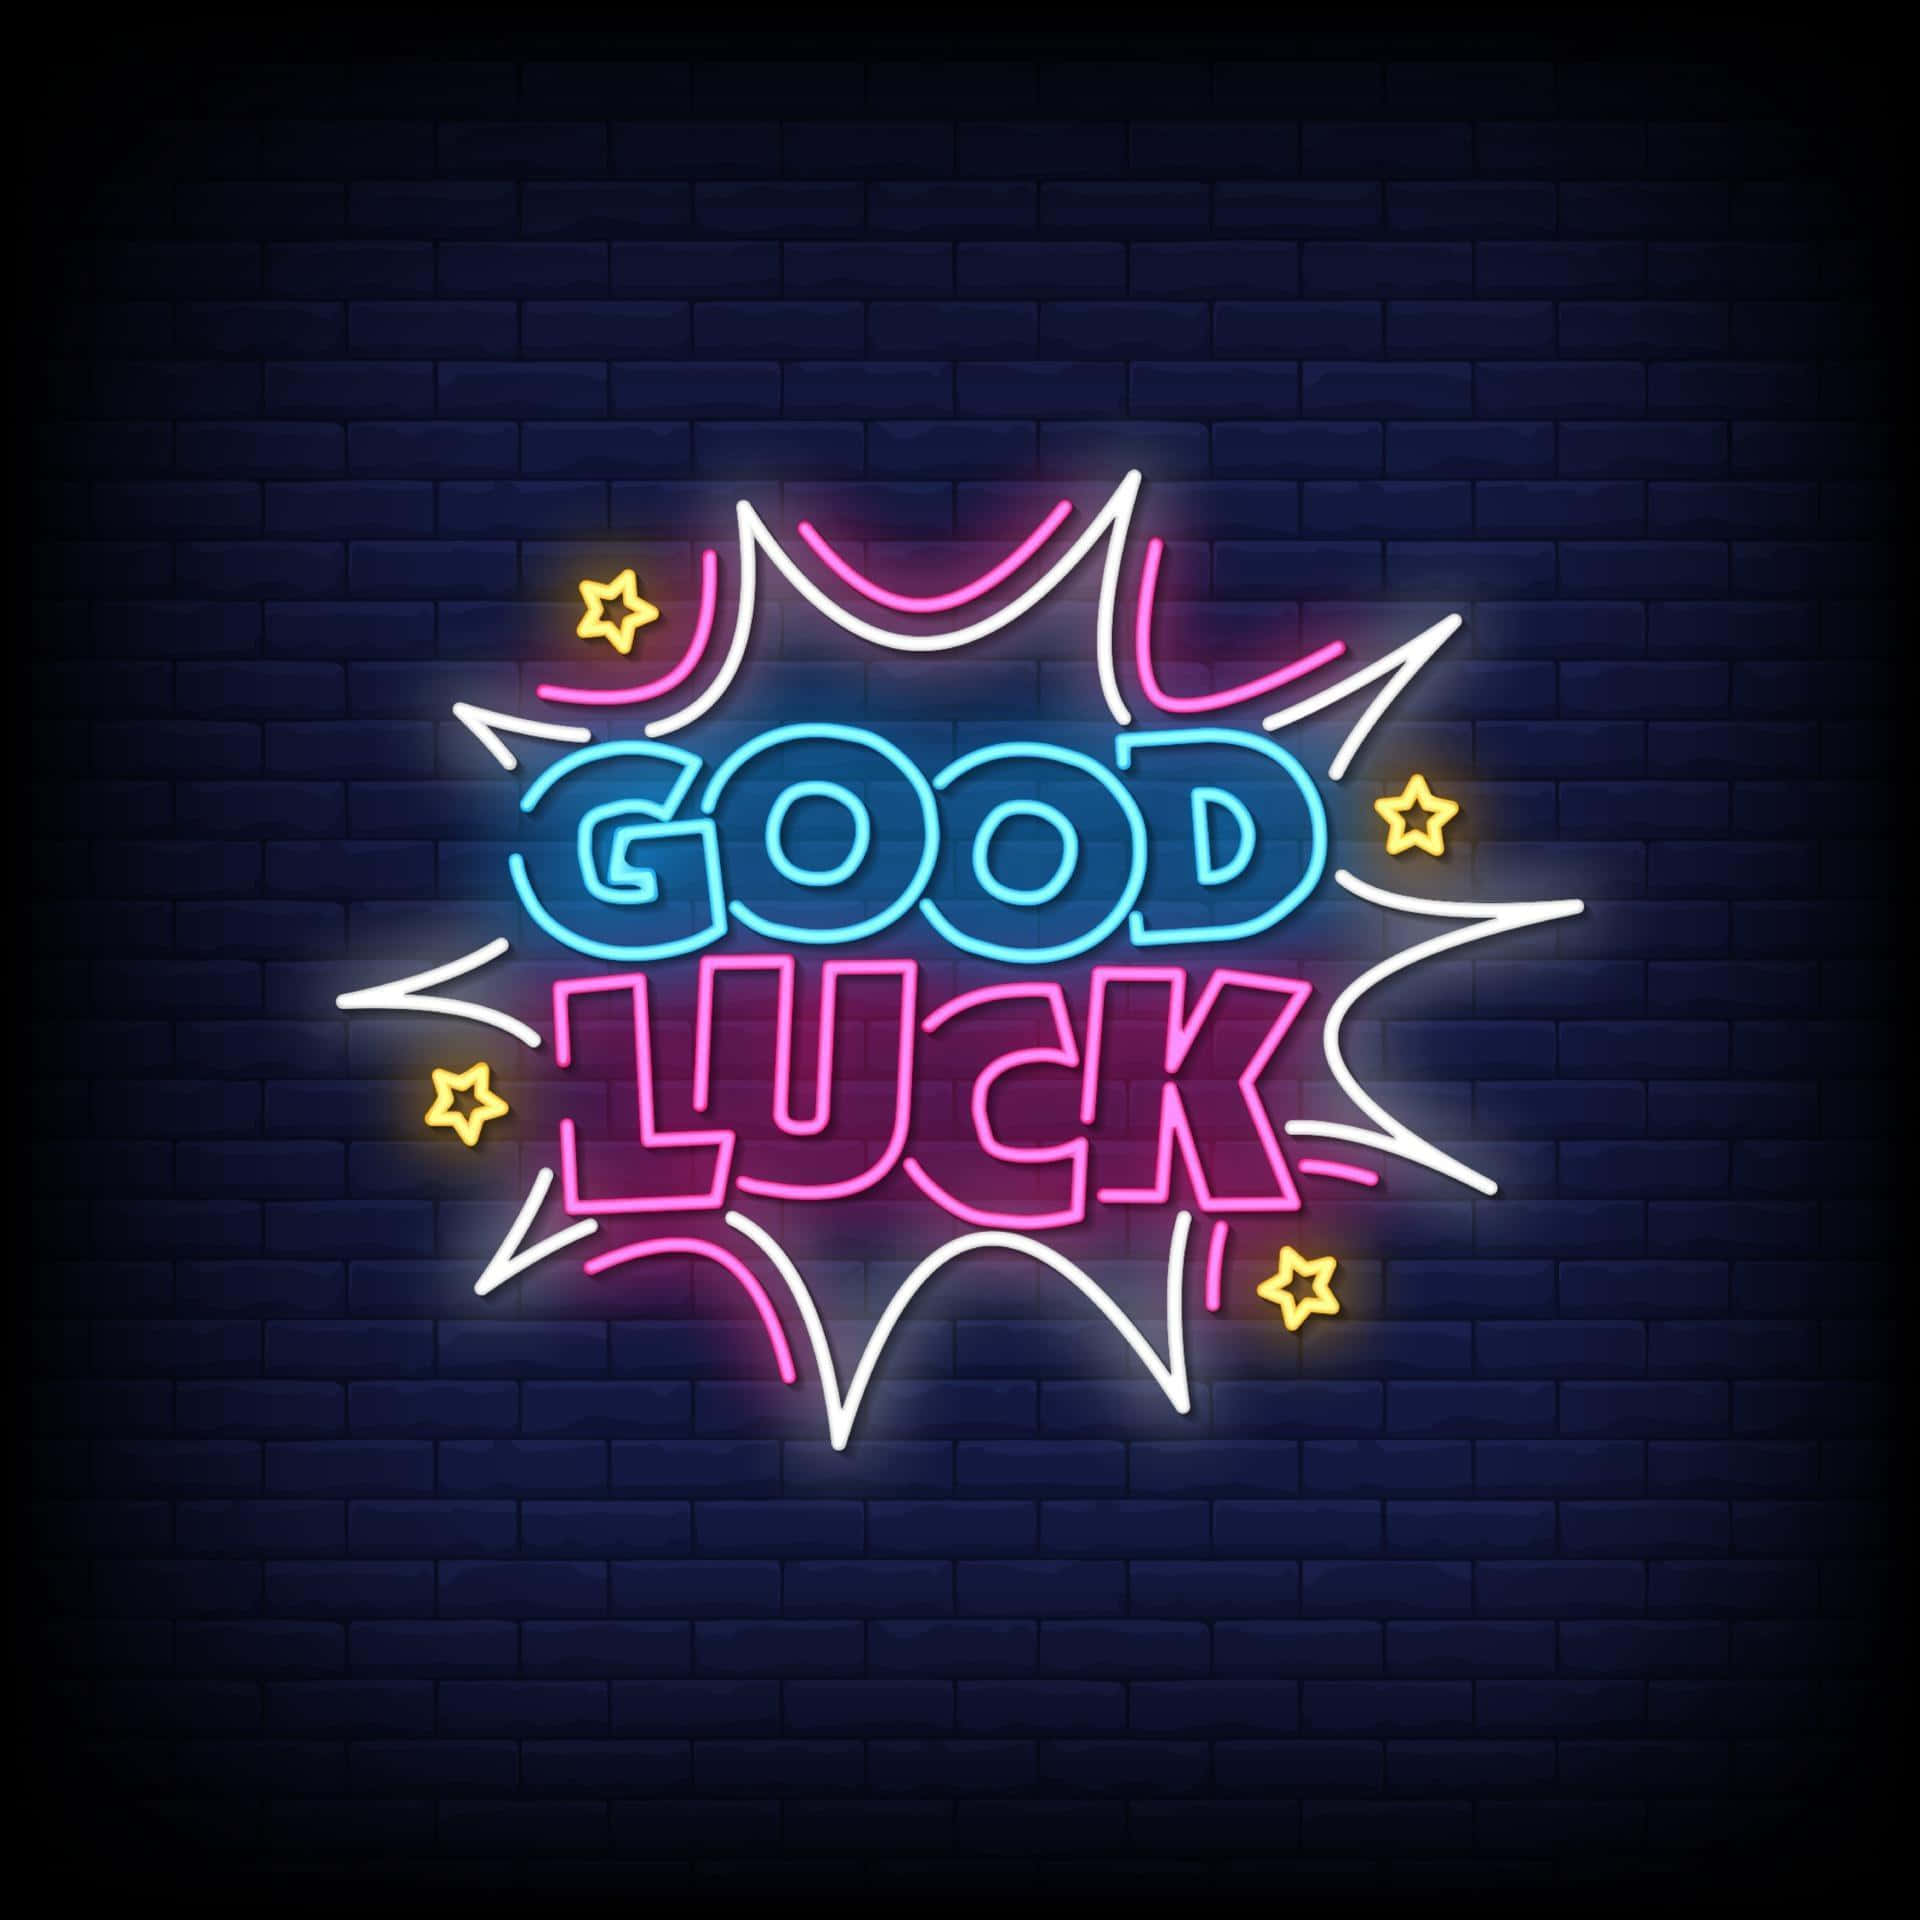 500 Good Luck Pictures  Download Free Images on Unsplash